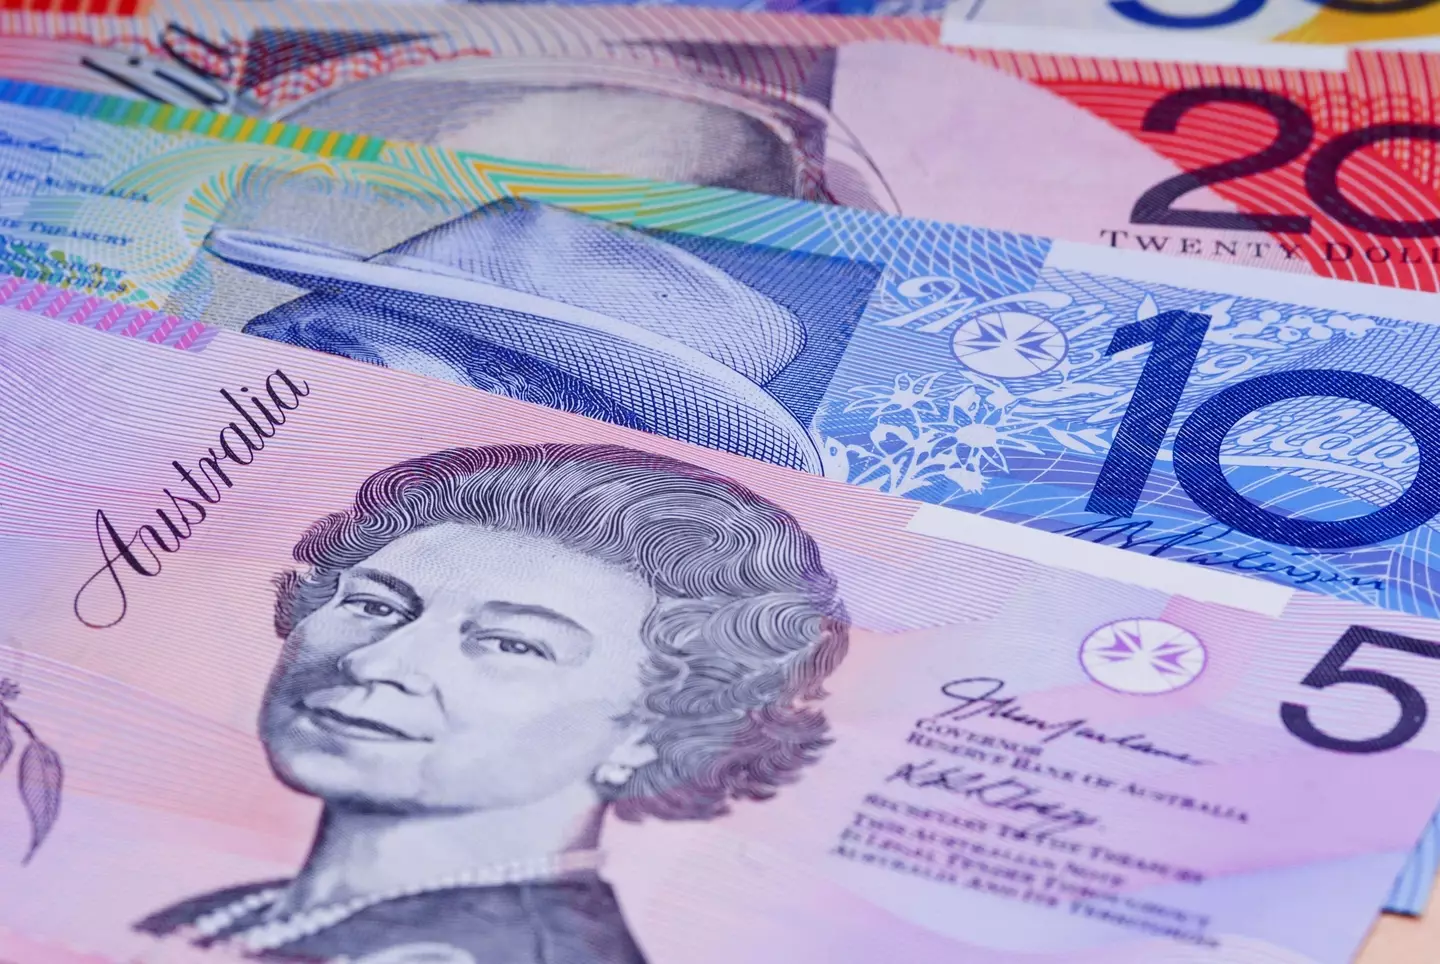 King Charles will take the place of his mother on Australian currency.